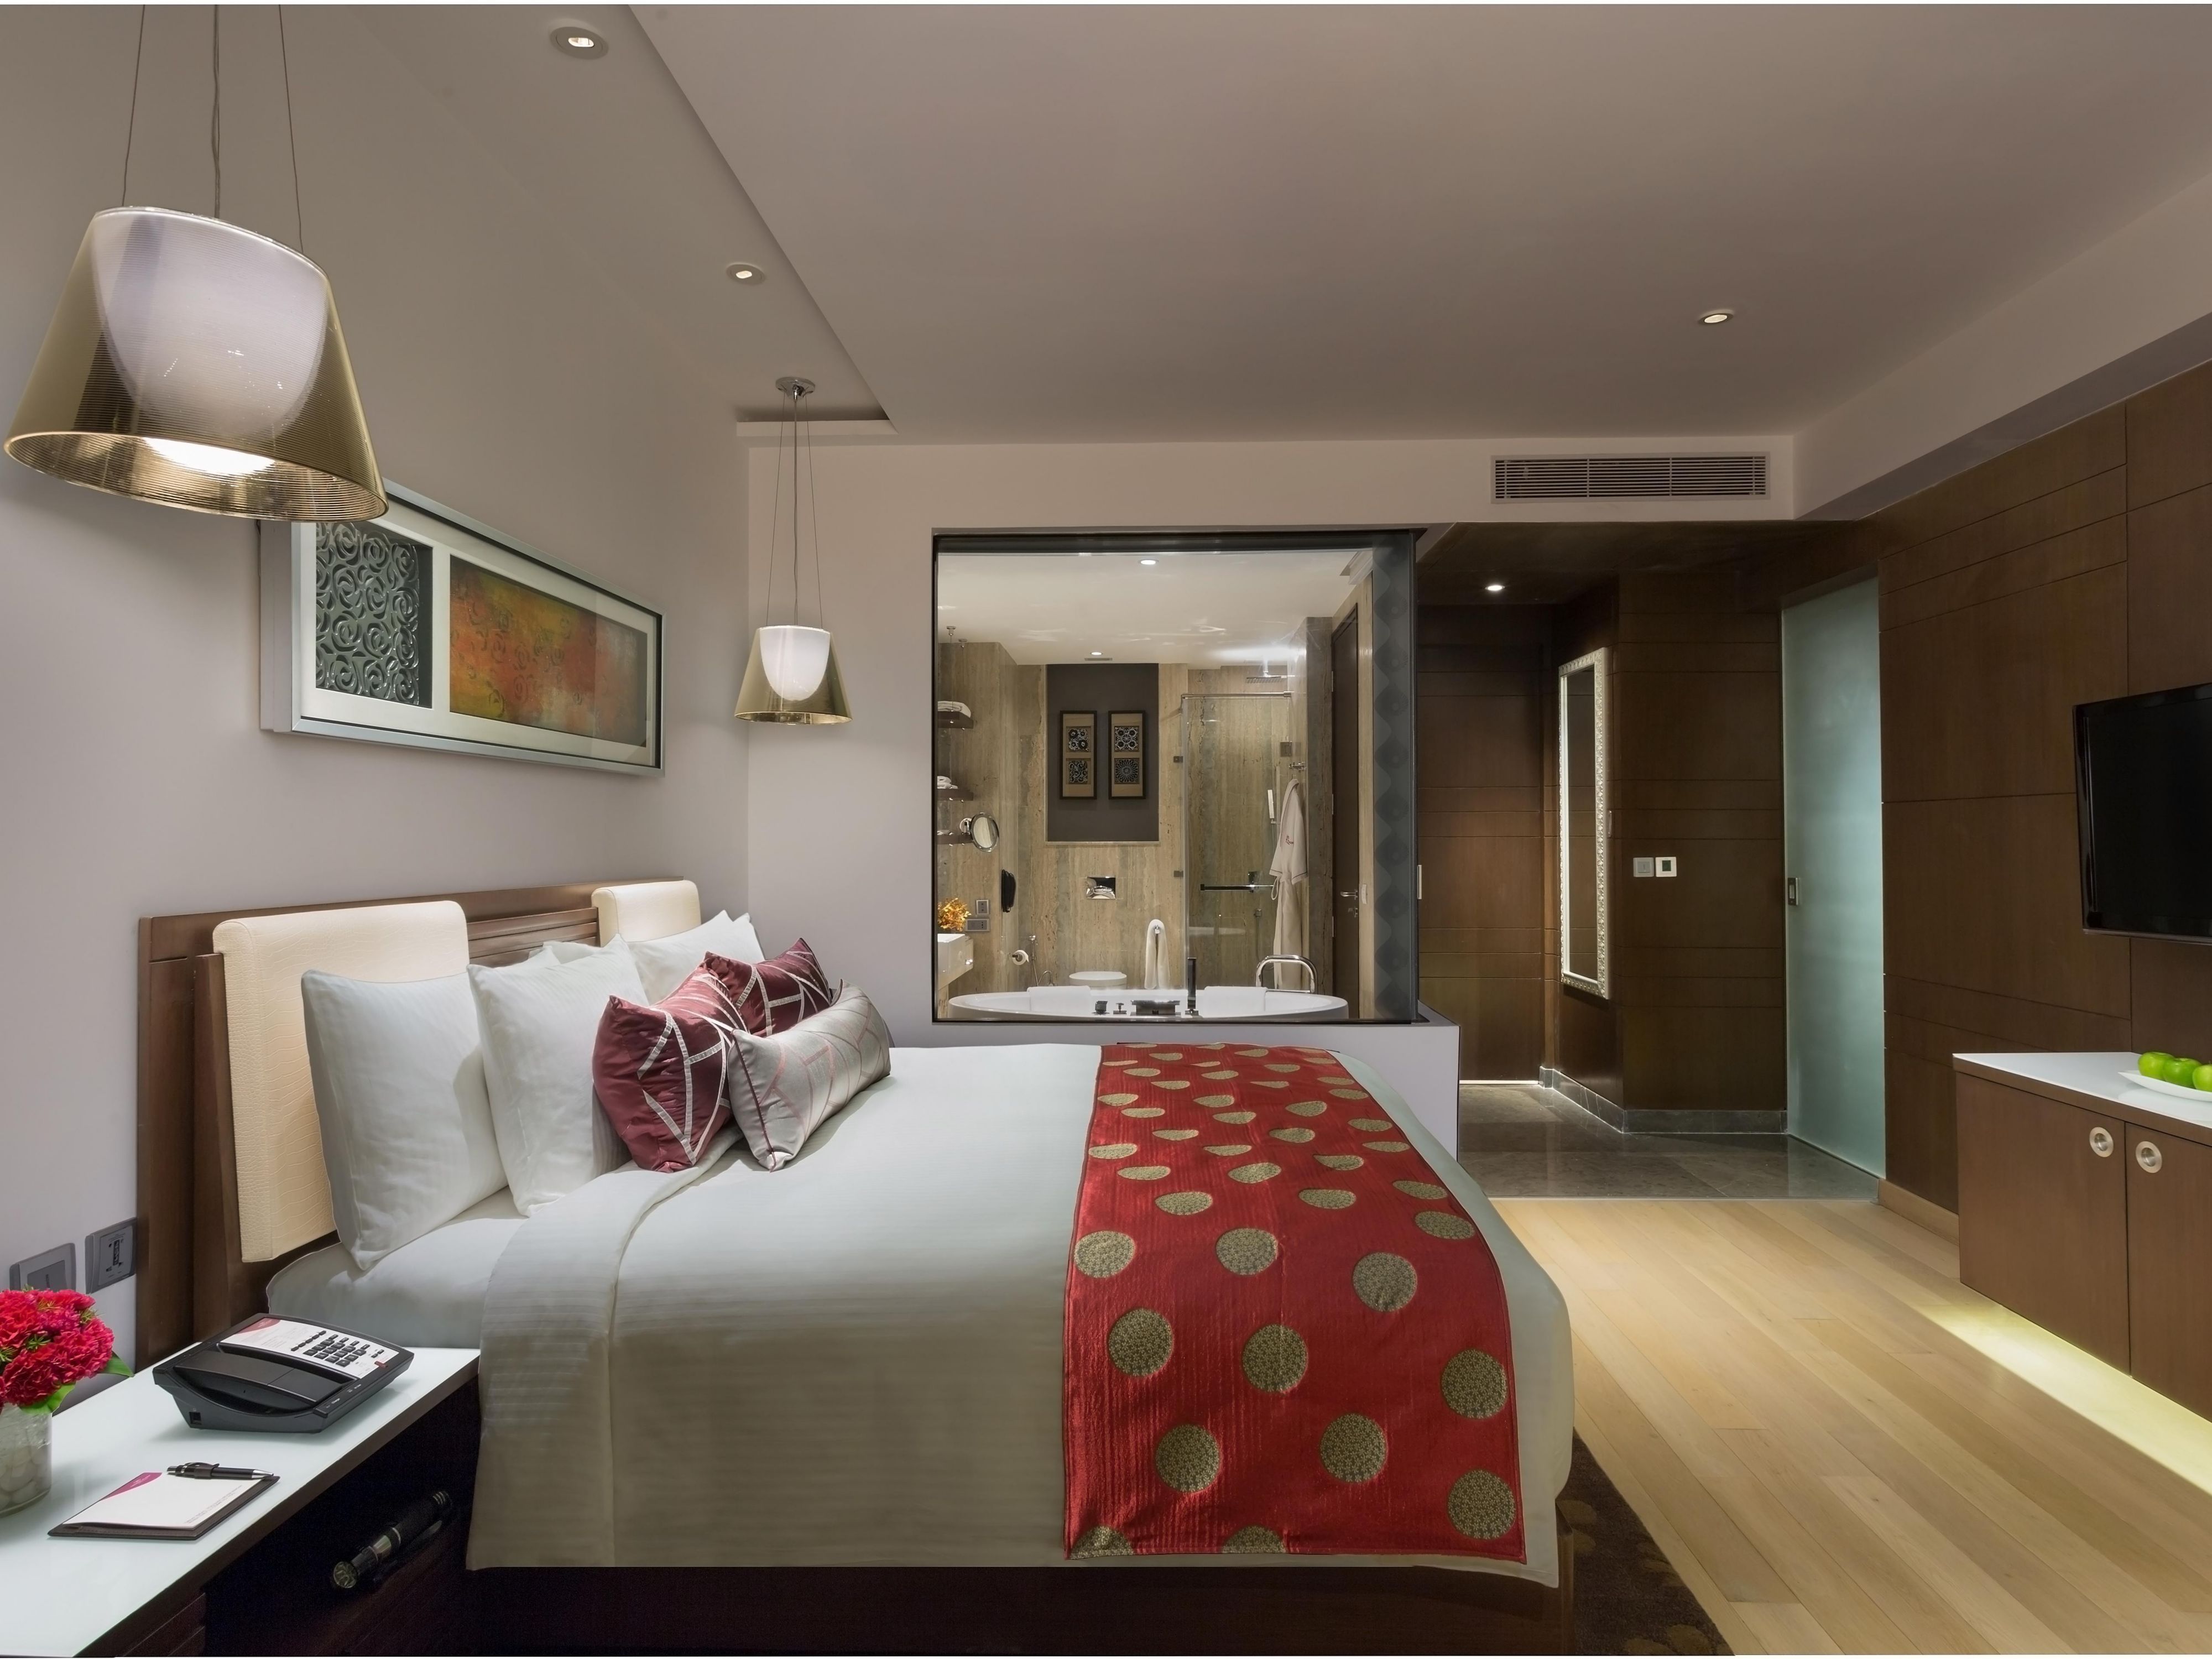 Enjoy a luxurious stay at the spacious and tastefully designed apartments and suites at Crowne Plaza Greater Noida. The expansive rooms offer a perfect balance of business and pleasure. The separate living area is ideal for entertaining guests while the private bedroom can be closed for complete privacy. Apartments also offer a kitchenette.